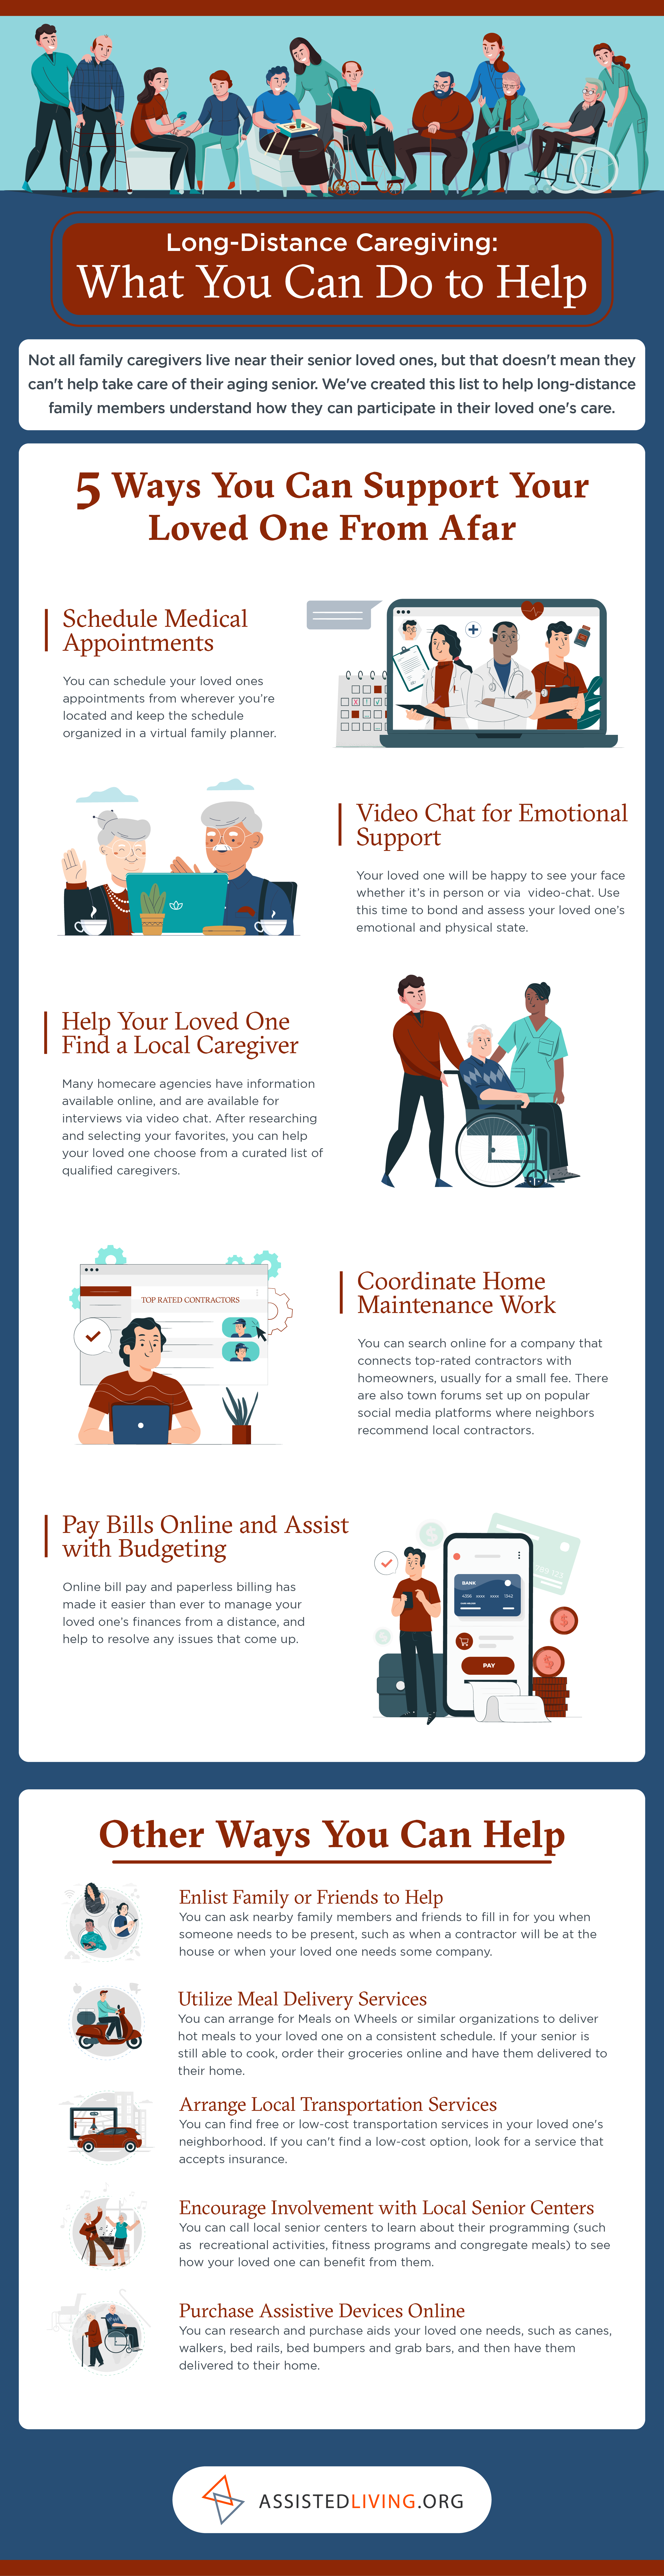 Guide to Caring for an Aging Parent From Long Distance